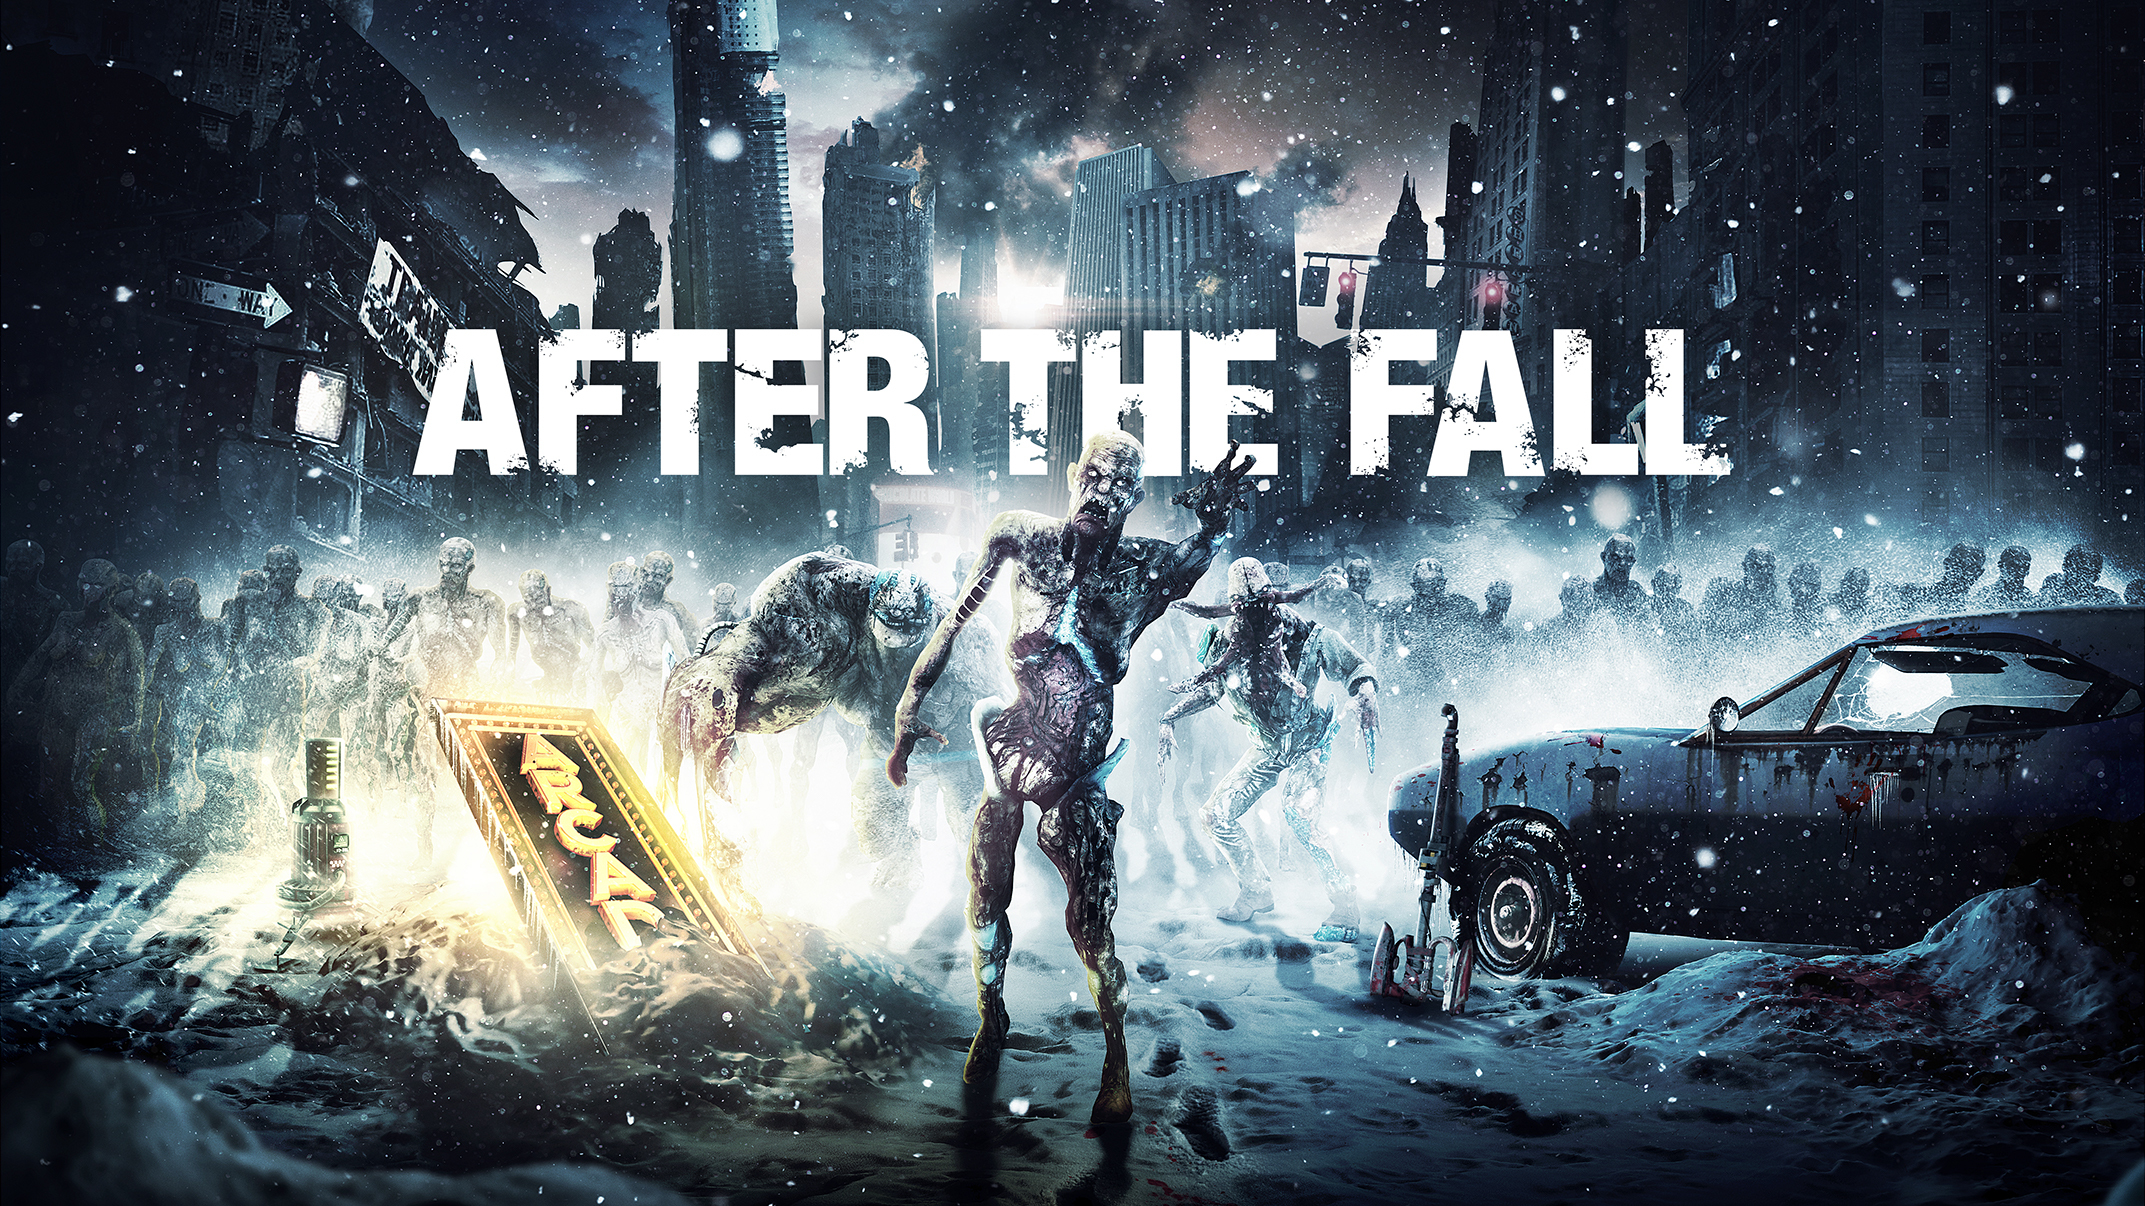 After the fall vr. After the Fall игра. Постеры игр. The Fall 3 игра.